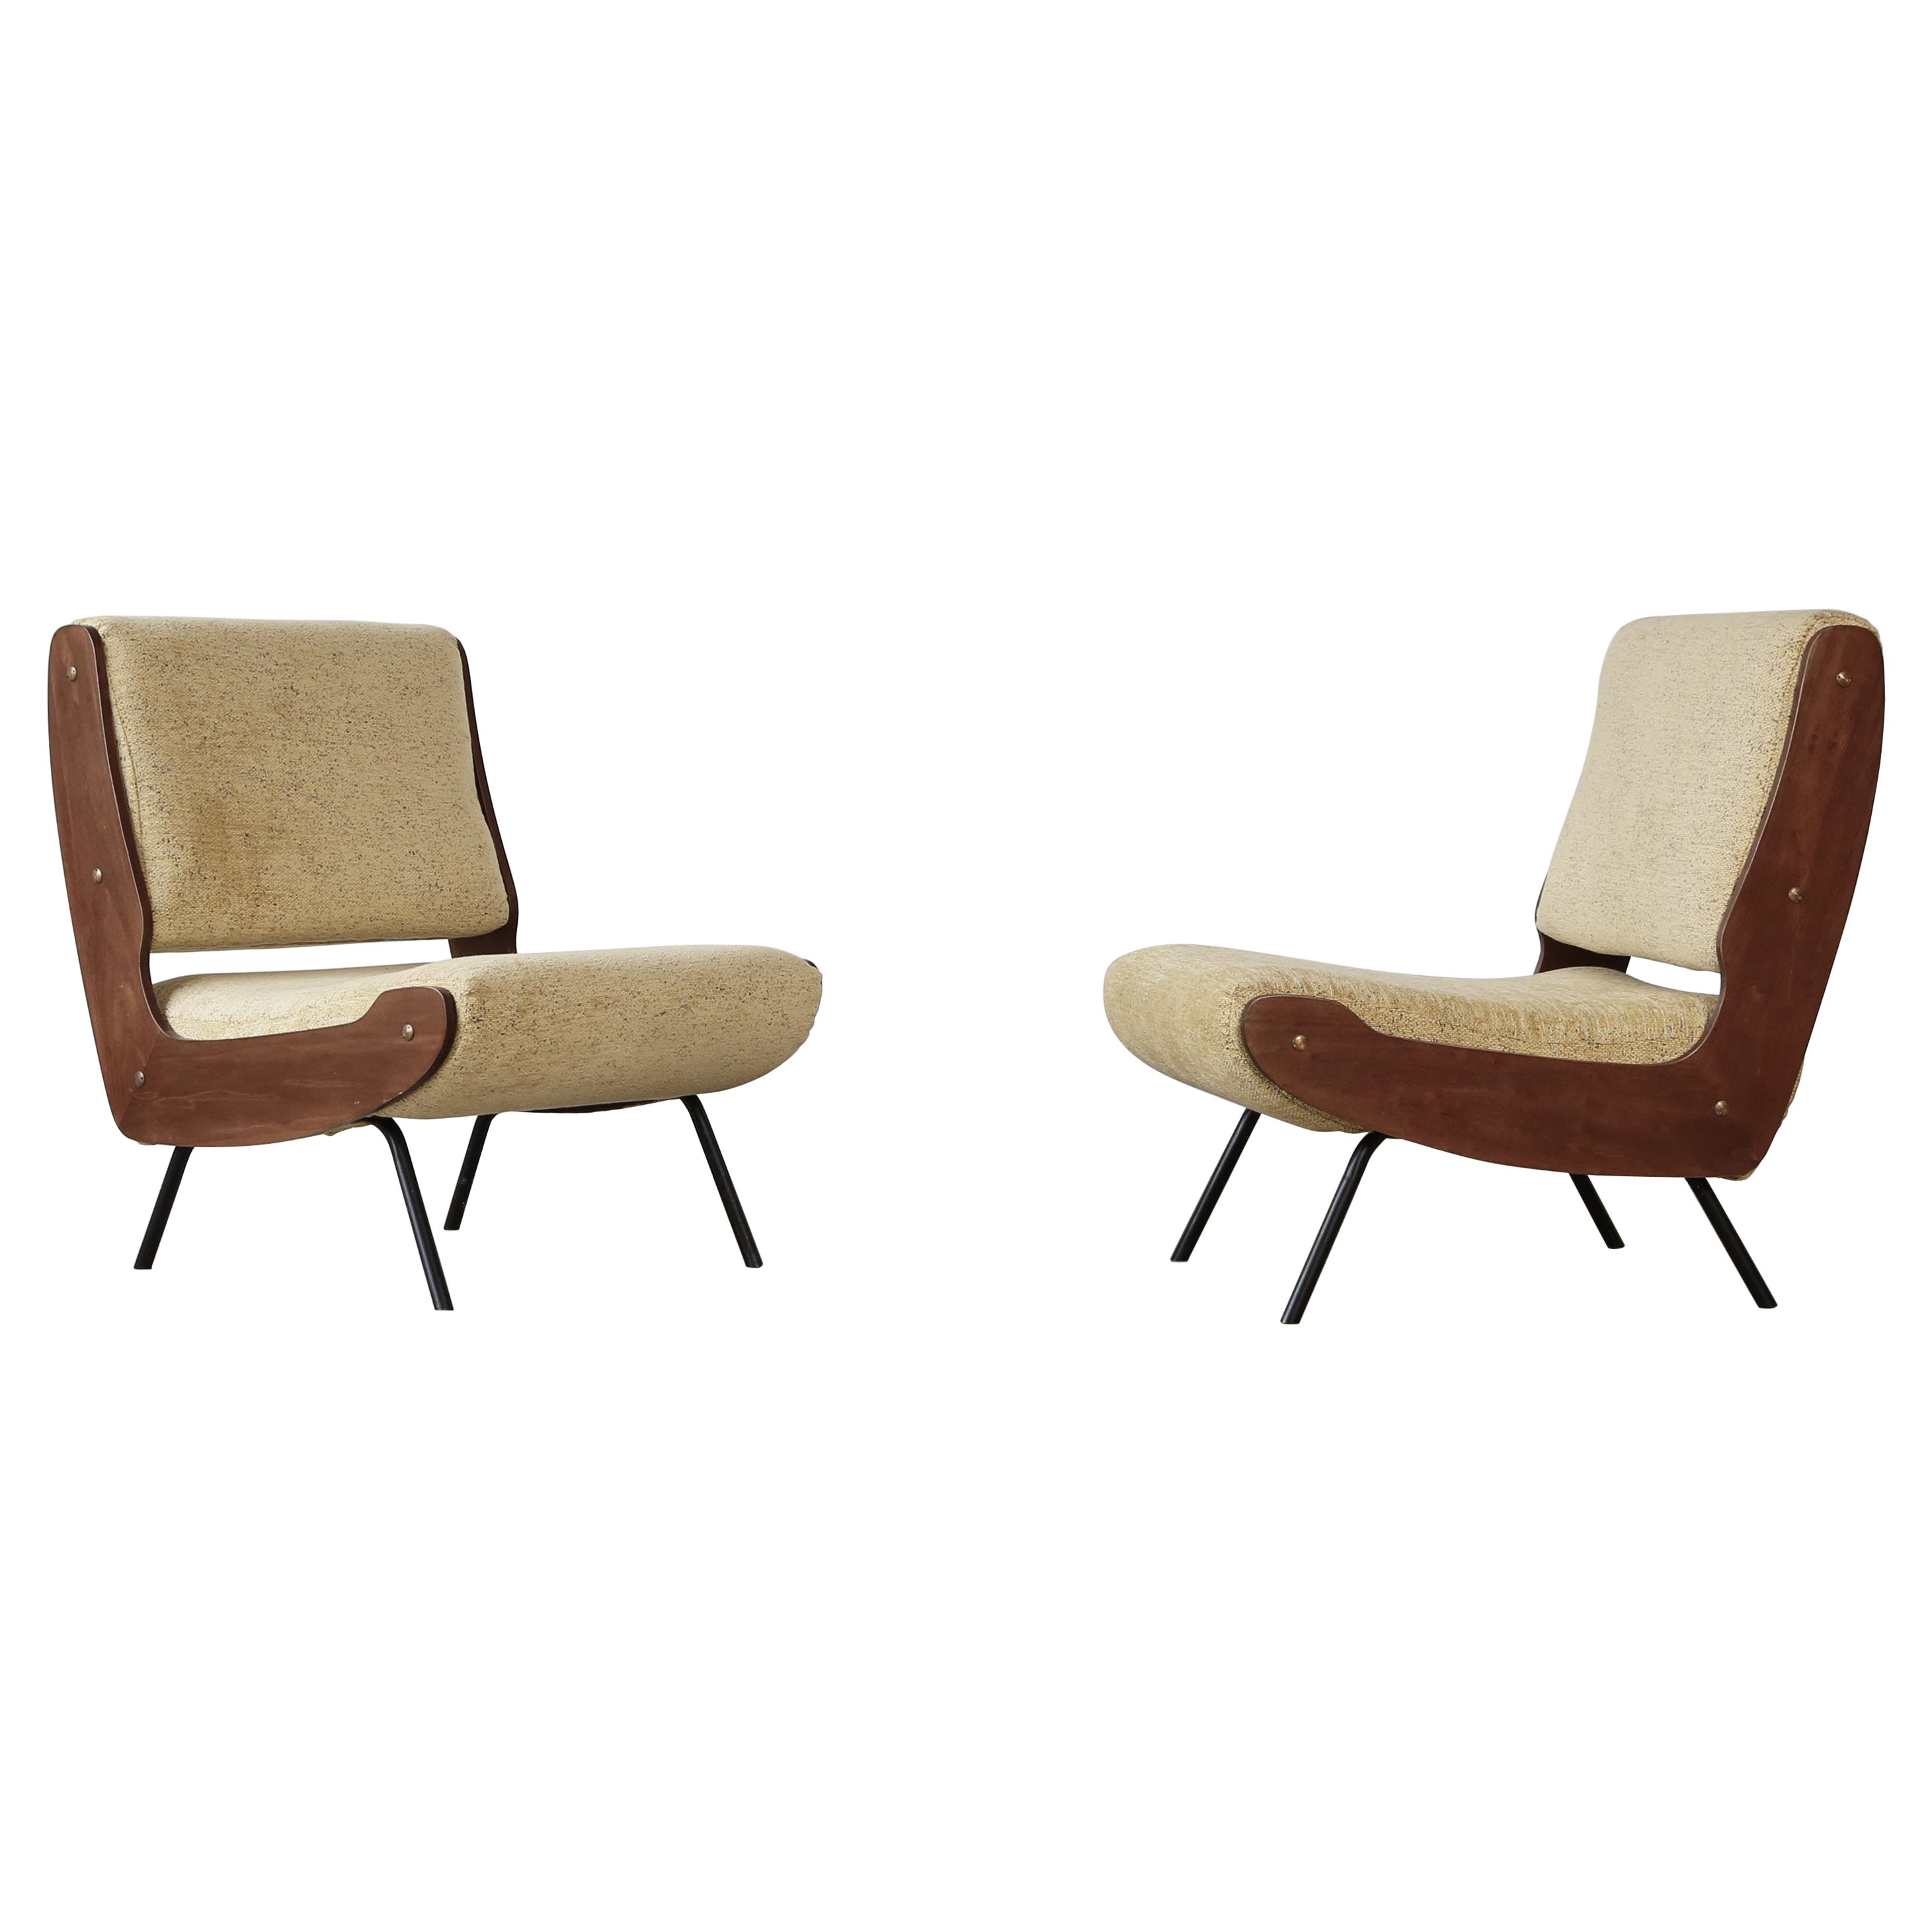 Gianfranco Frattini 836 Lounge Chairs, Cassina, Italy, 1950s For Sale